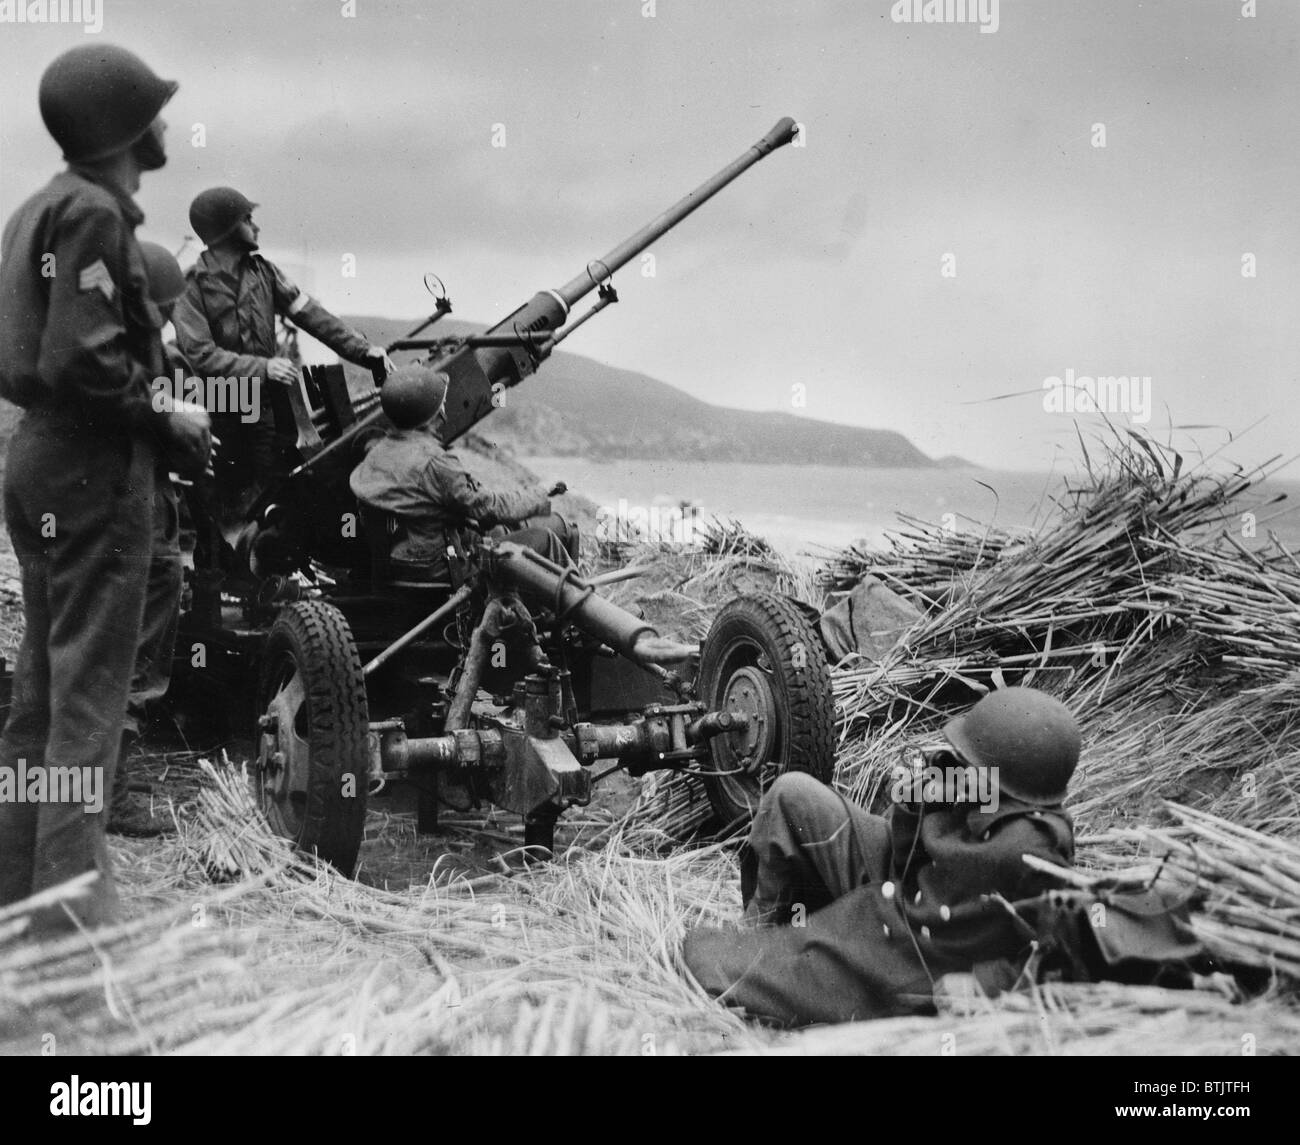 World War II, original caption: 'Anti-aircraft bofors gun in at position on a mound overlooking the beach in Algeria with a United States anti-aircraft artillery crew in position', circa 1943. Stock Photo